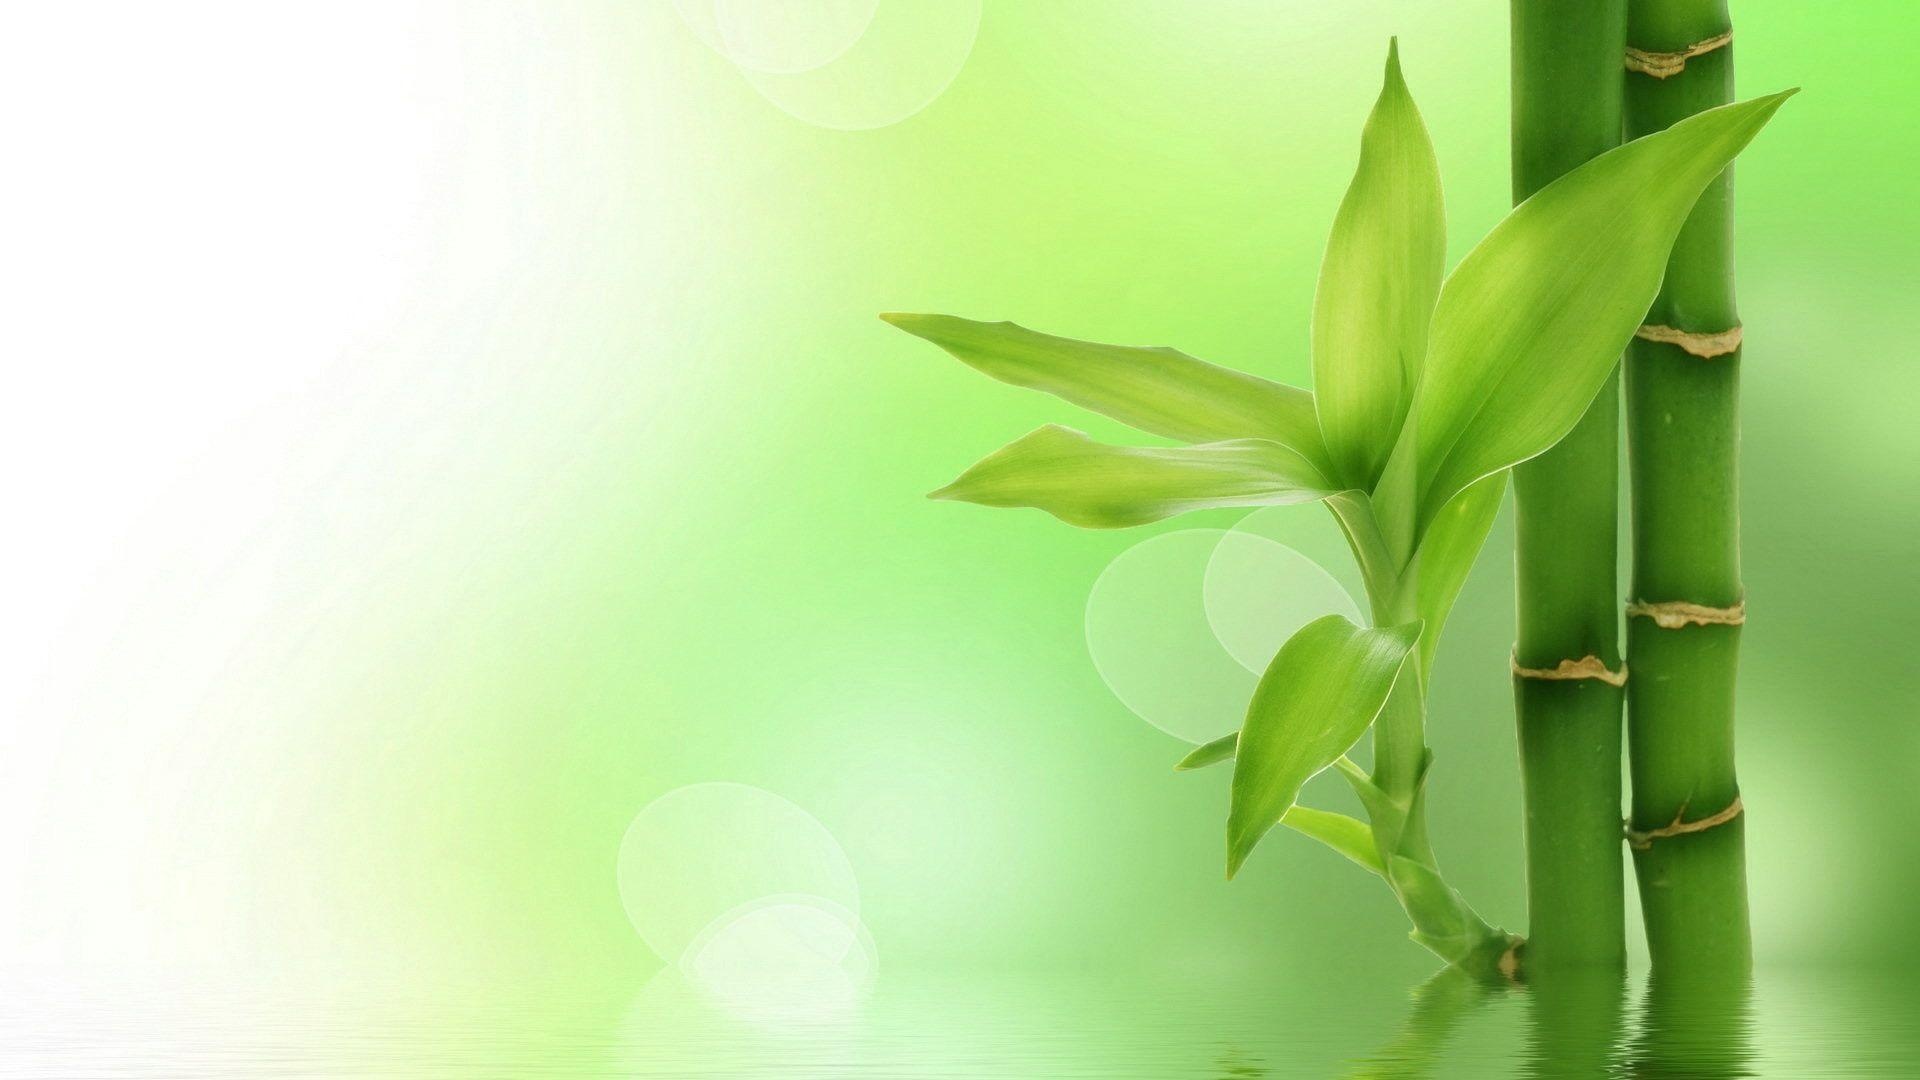 Bamboo wallpaper, Natural beauty, Exquisite bamboo, Tranquil background, 1920x1080 Full HD Desktop